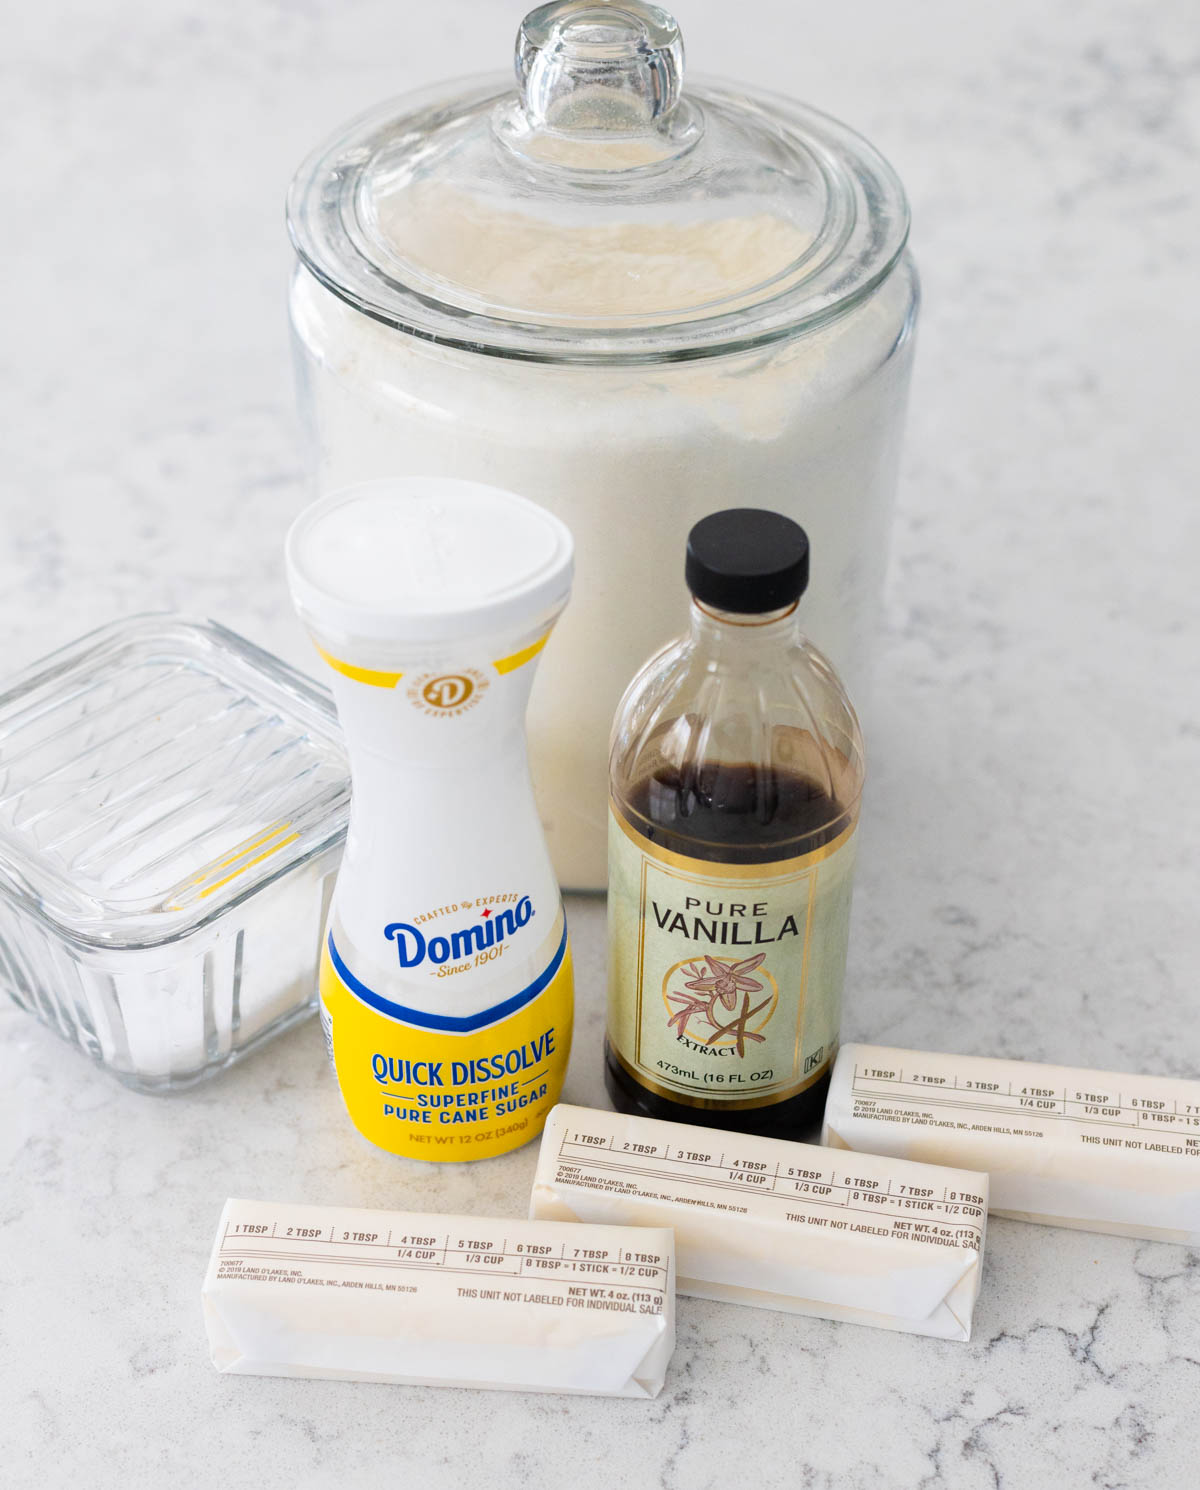 The ingredients to make homemade shortbread are on the counter.